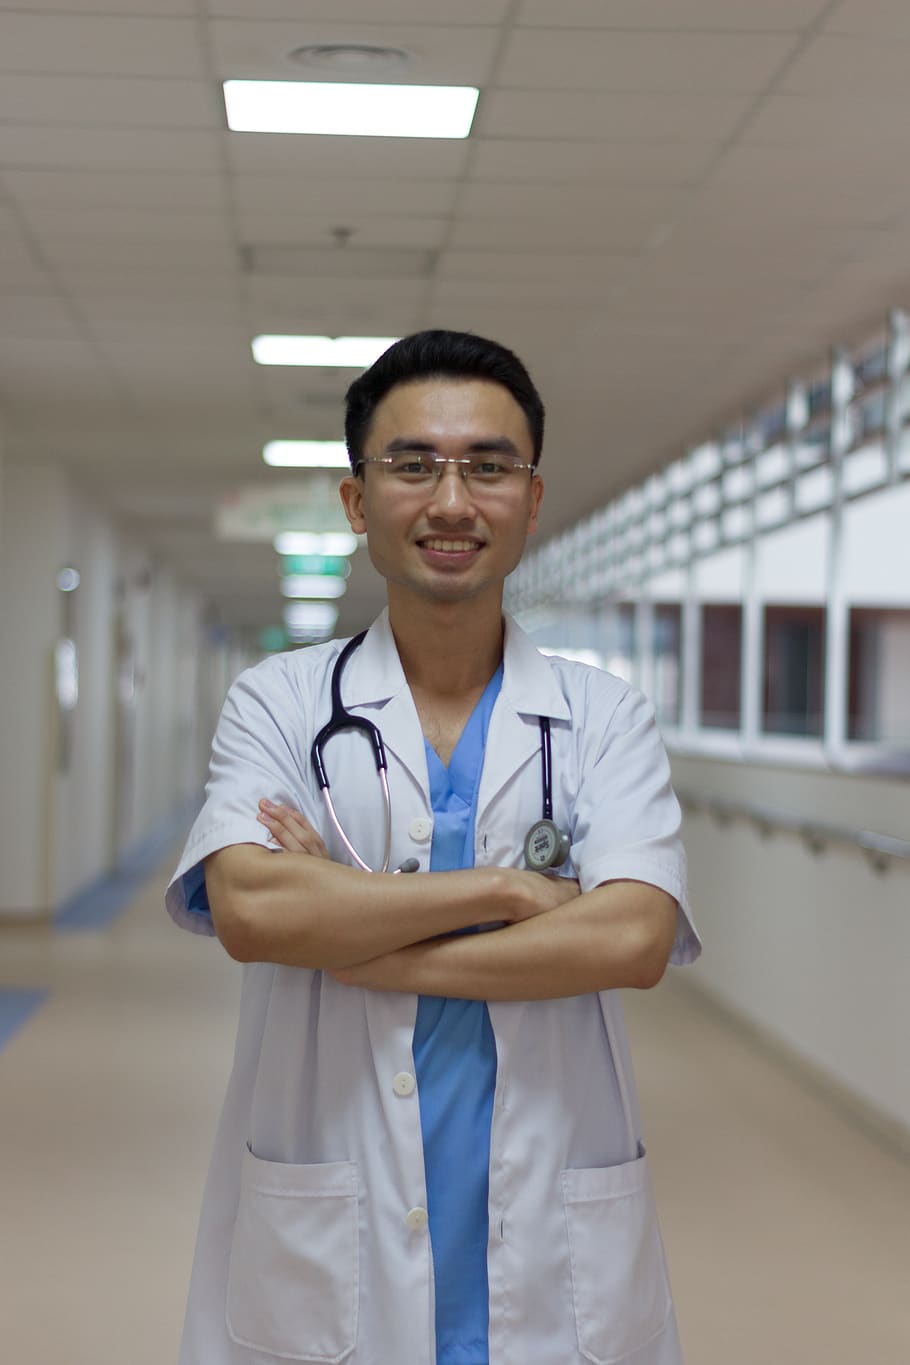 doctor, hospital, health, care, surgeon, looking at camera, portrait, front view, occupation, healthcare and medicine